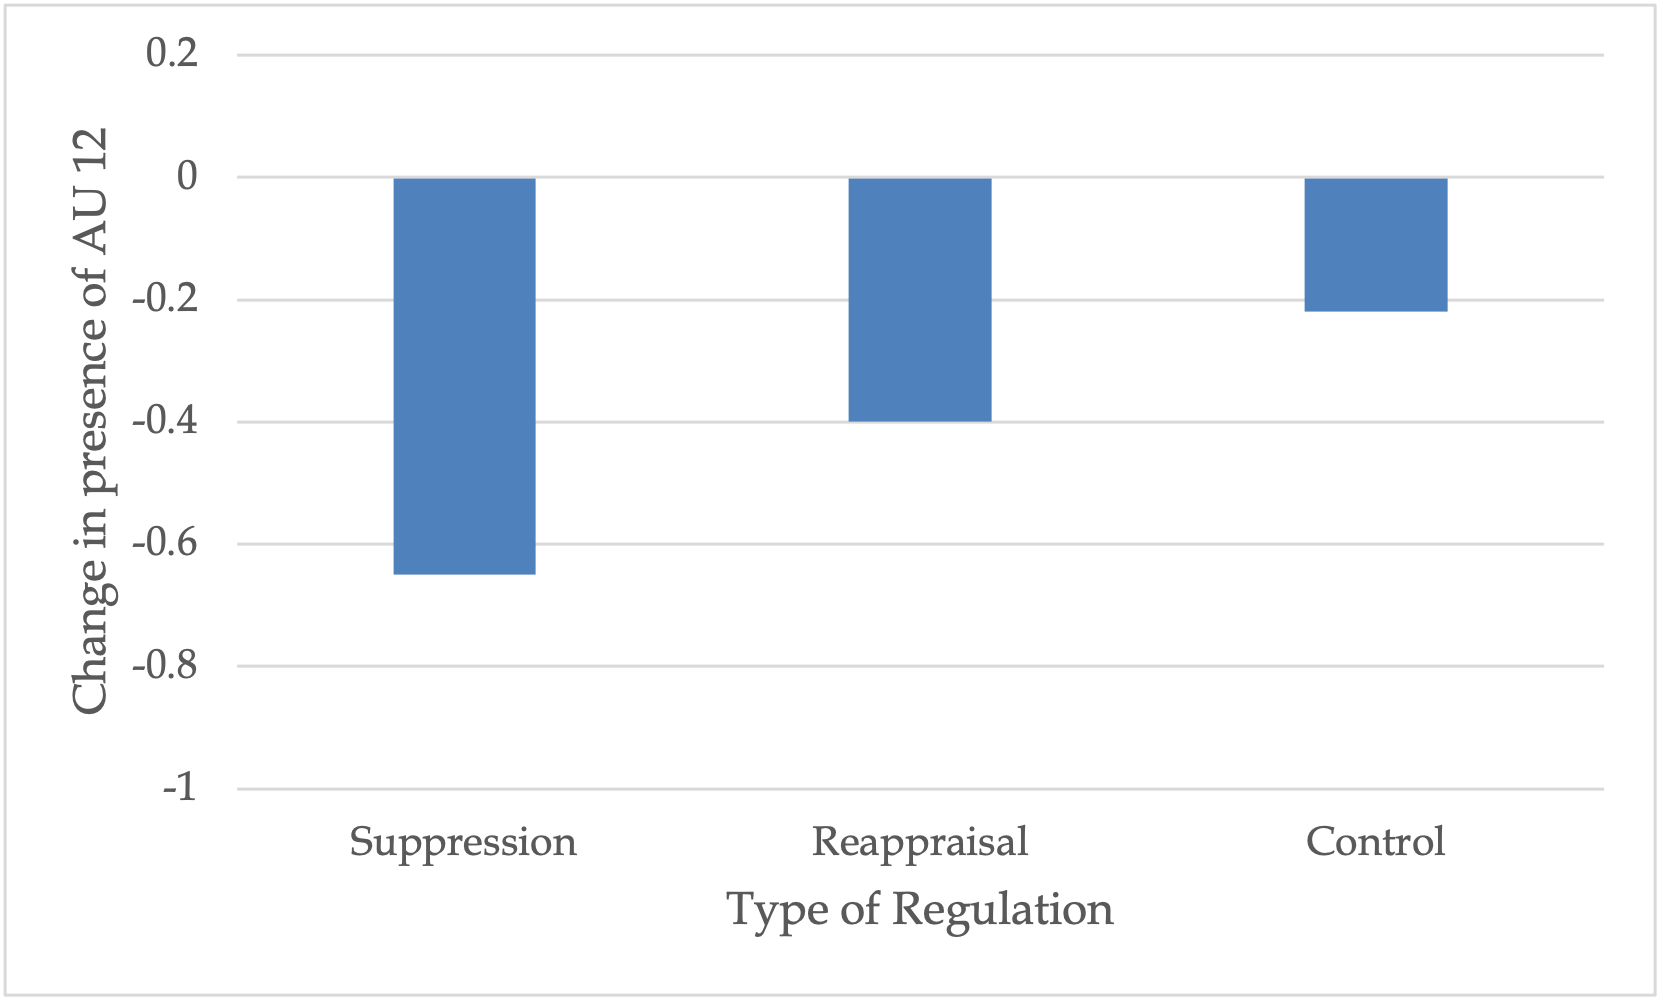 Three bar graphs, one for each type of regulation (suppression, reappraisal, control. x axis). The types of regulation are graphed for changes in presence of AU 12 (y axis), all of which resulting in a negative change.